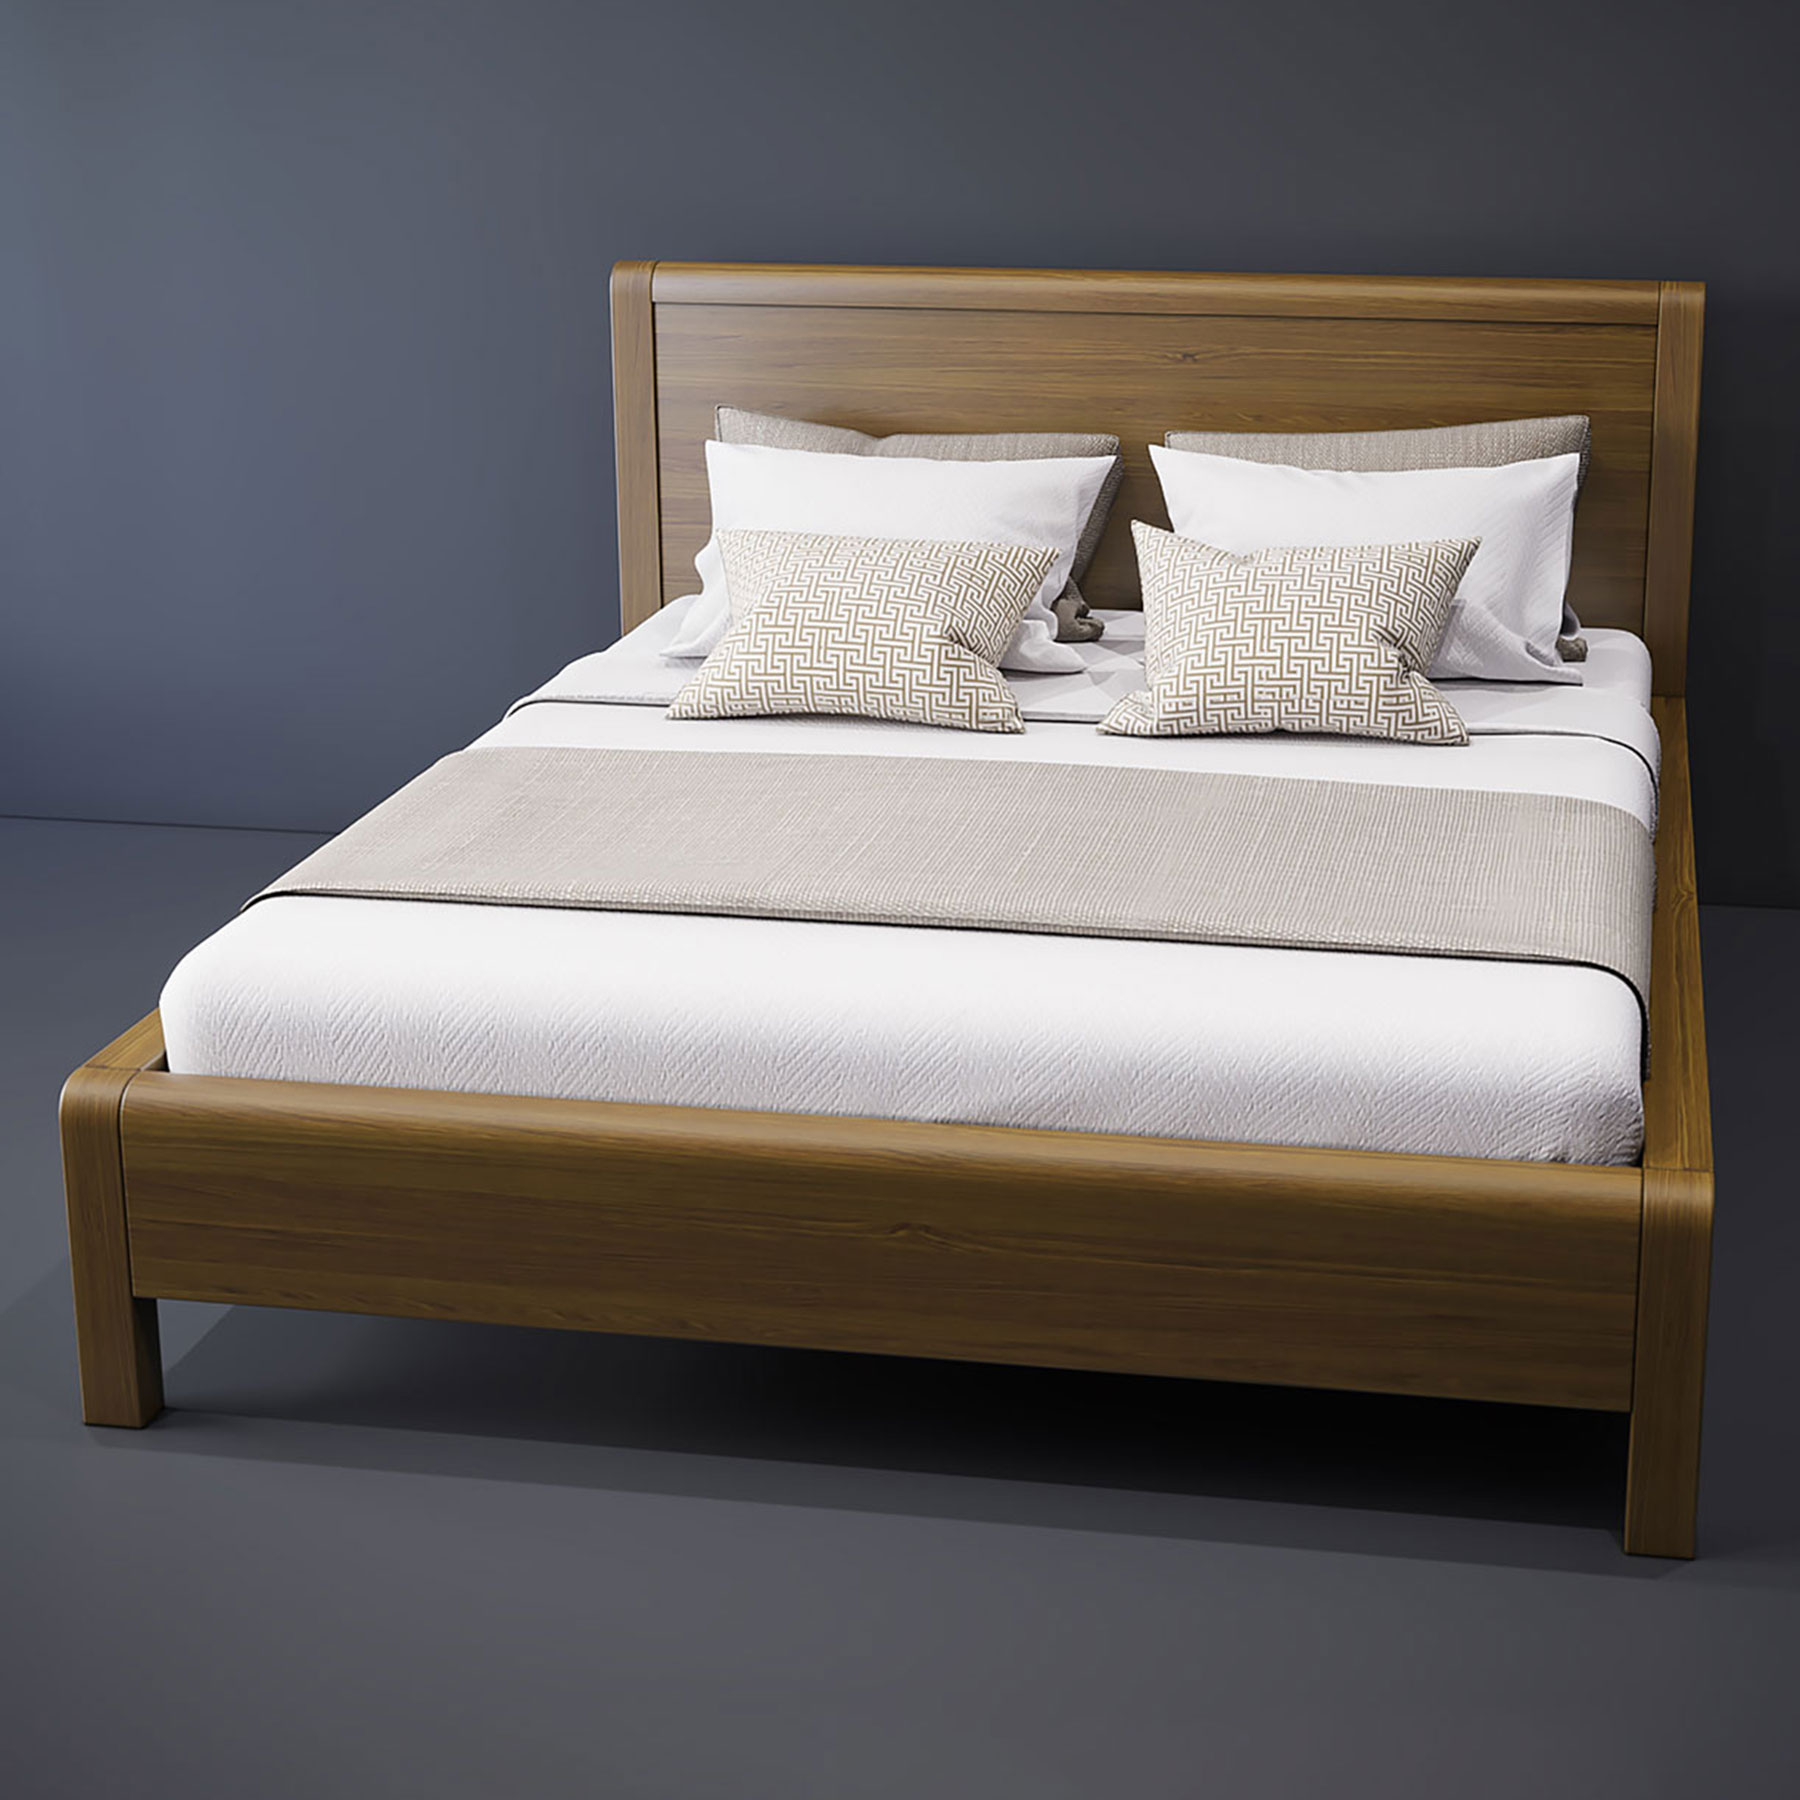 Double bed from the Iris collection